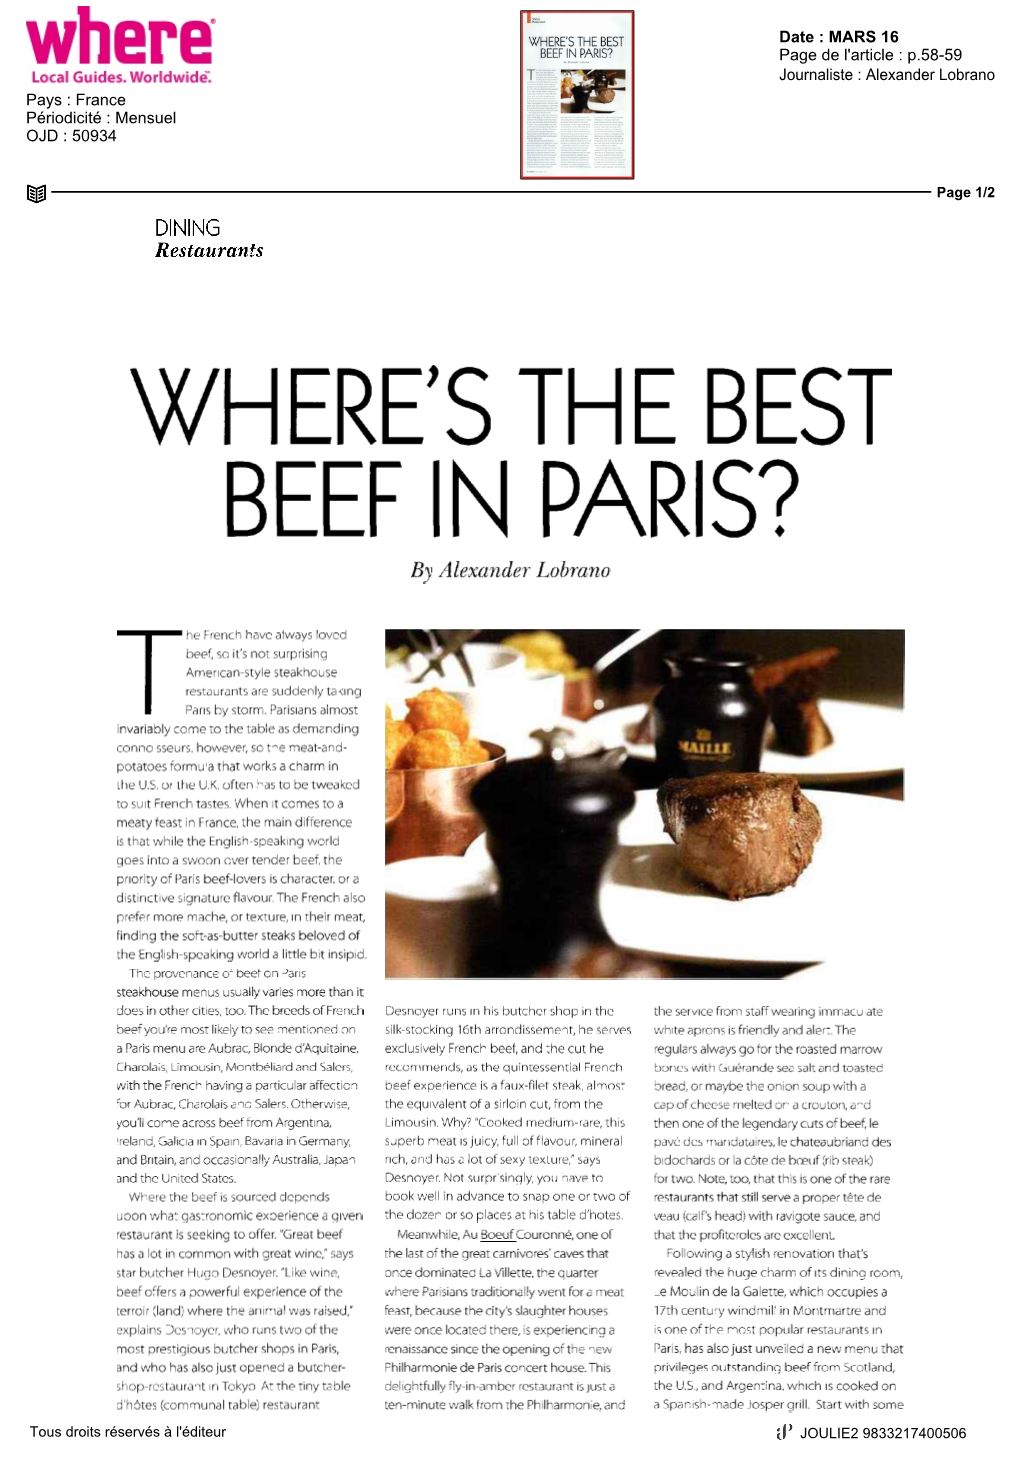 WHERE's the BEST BEER in PARIS? by Alexander Lobrano